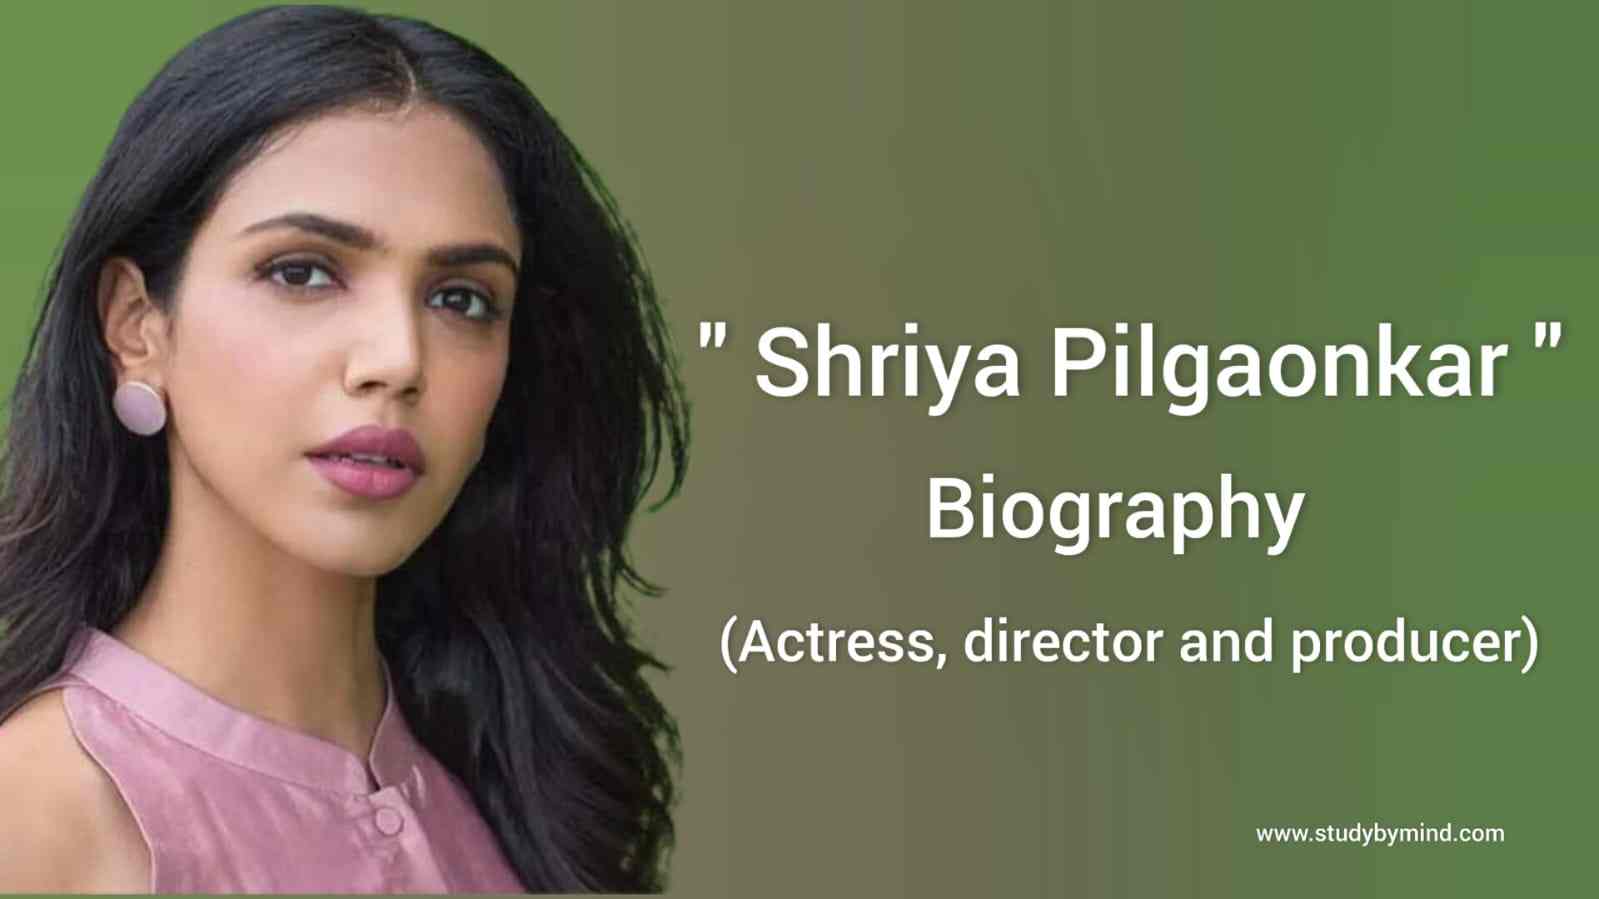 You are currently viewing Shriya pilgaonkar biography in english (actress, director and producer)